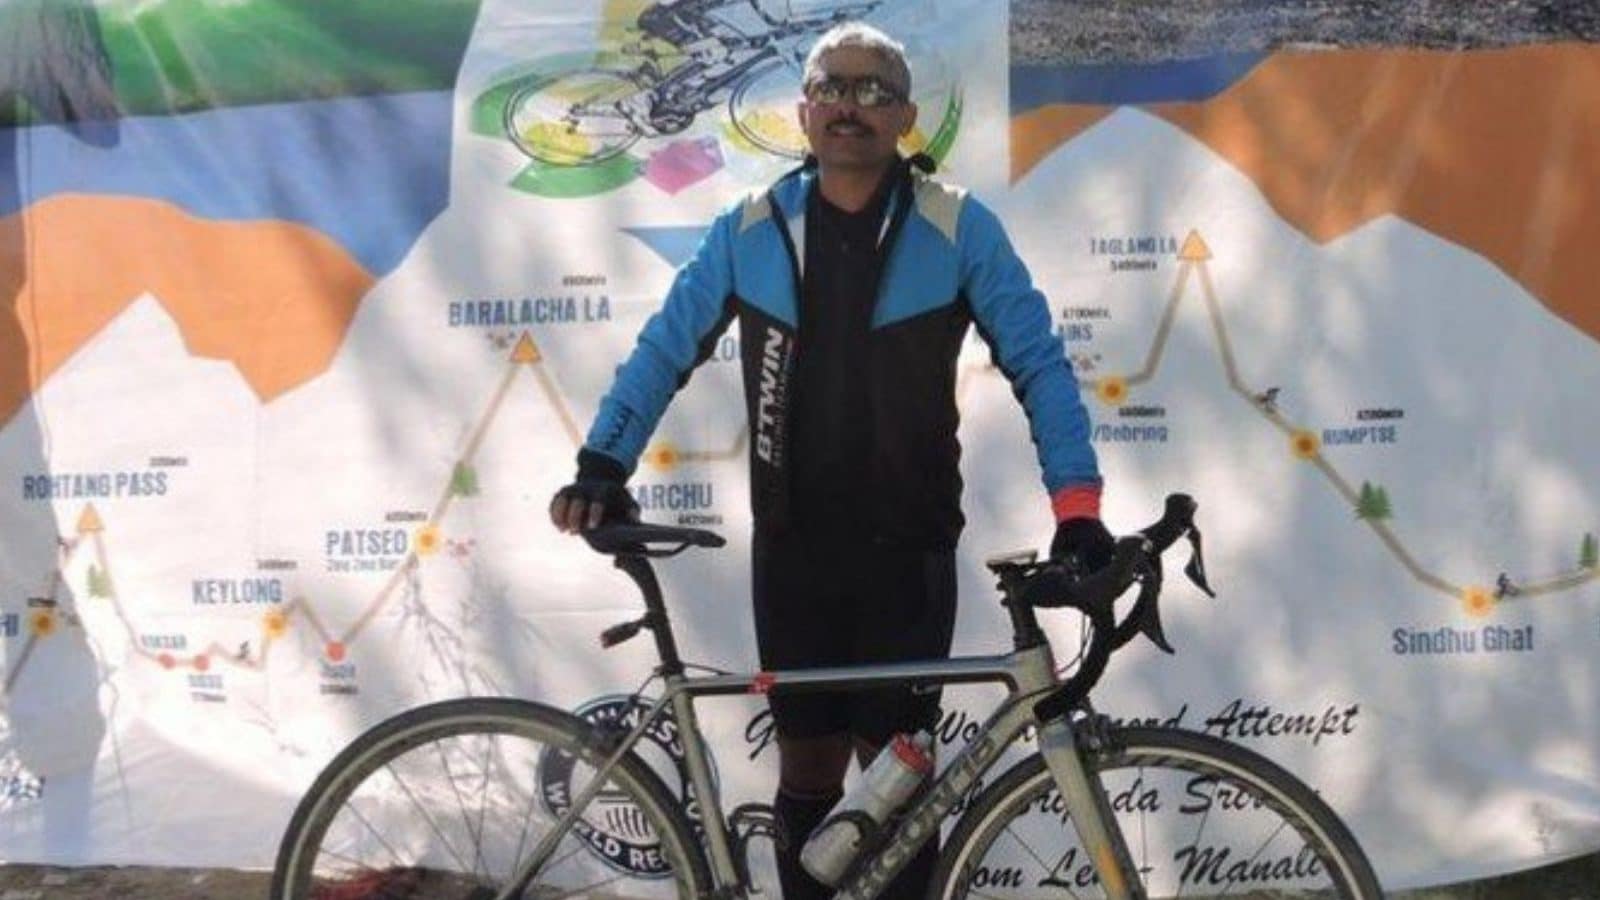 Army officer Sripada Sriram sets Guinness record for ‘fastest solo cycling’ from Leh to Manali